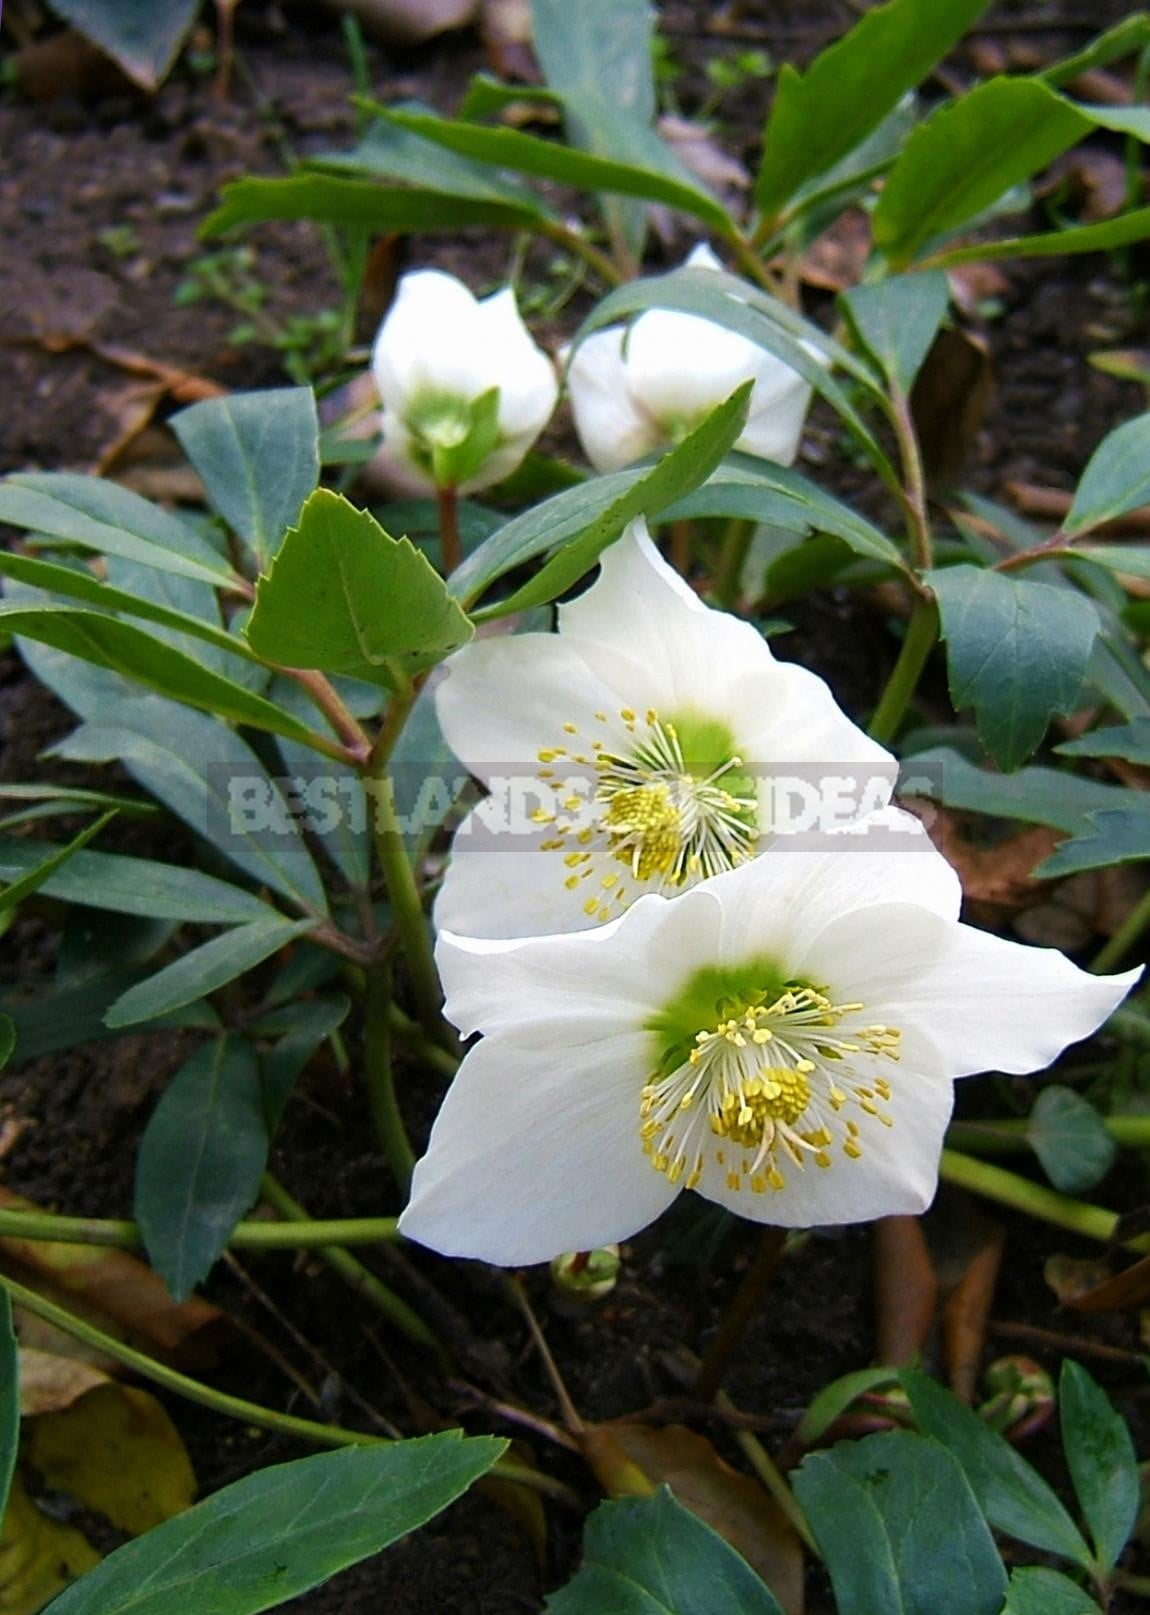 The Healing Power of the Christmas Rose: The Medicinal Value of Black Hellebore